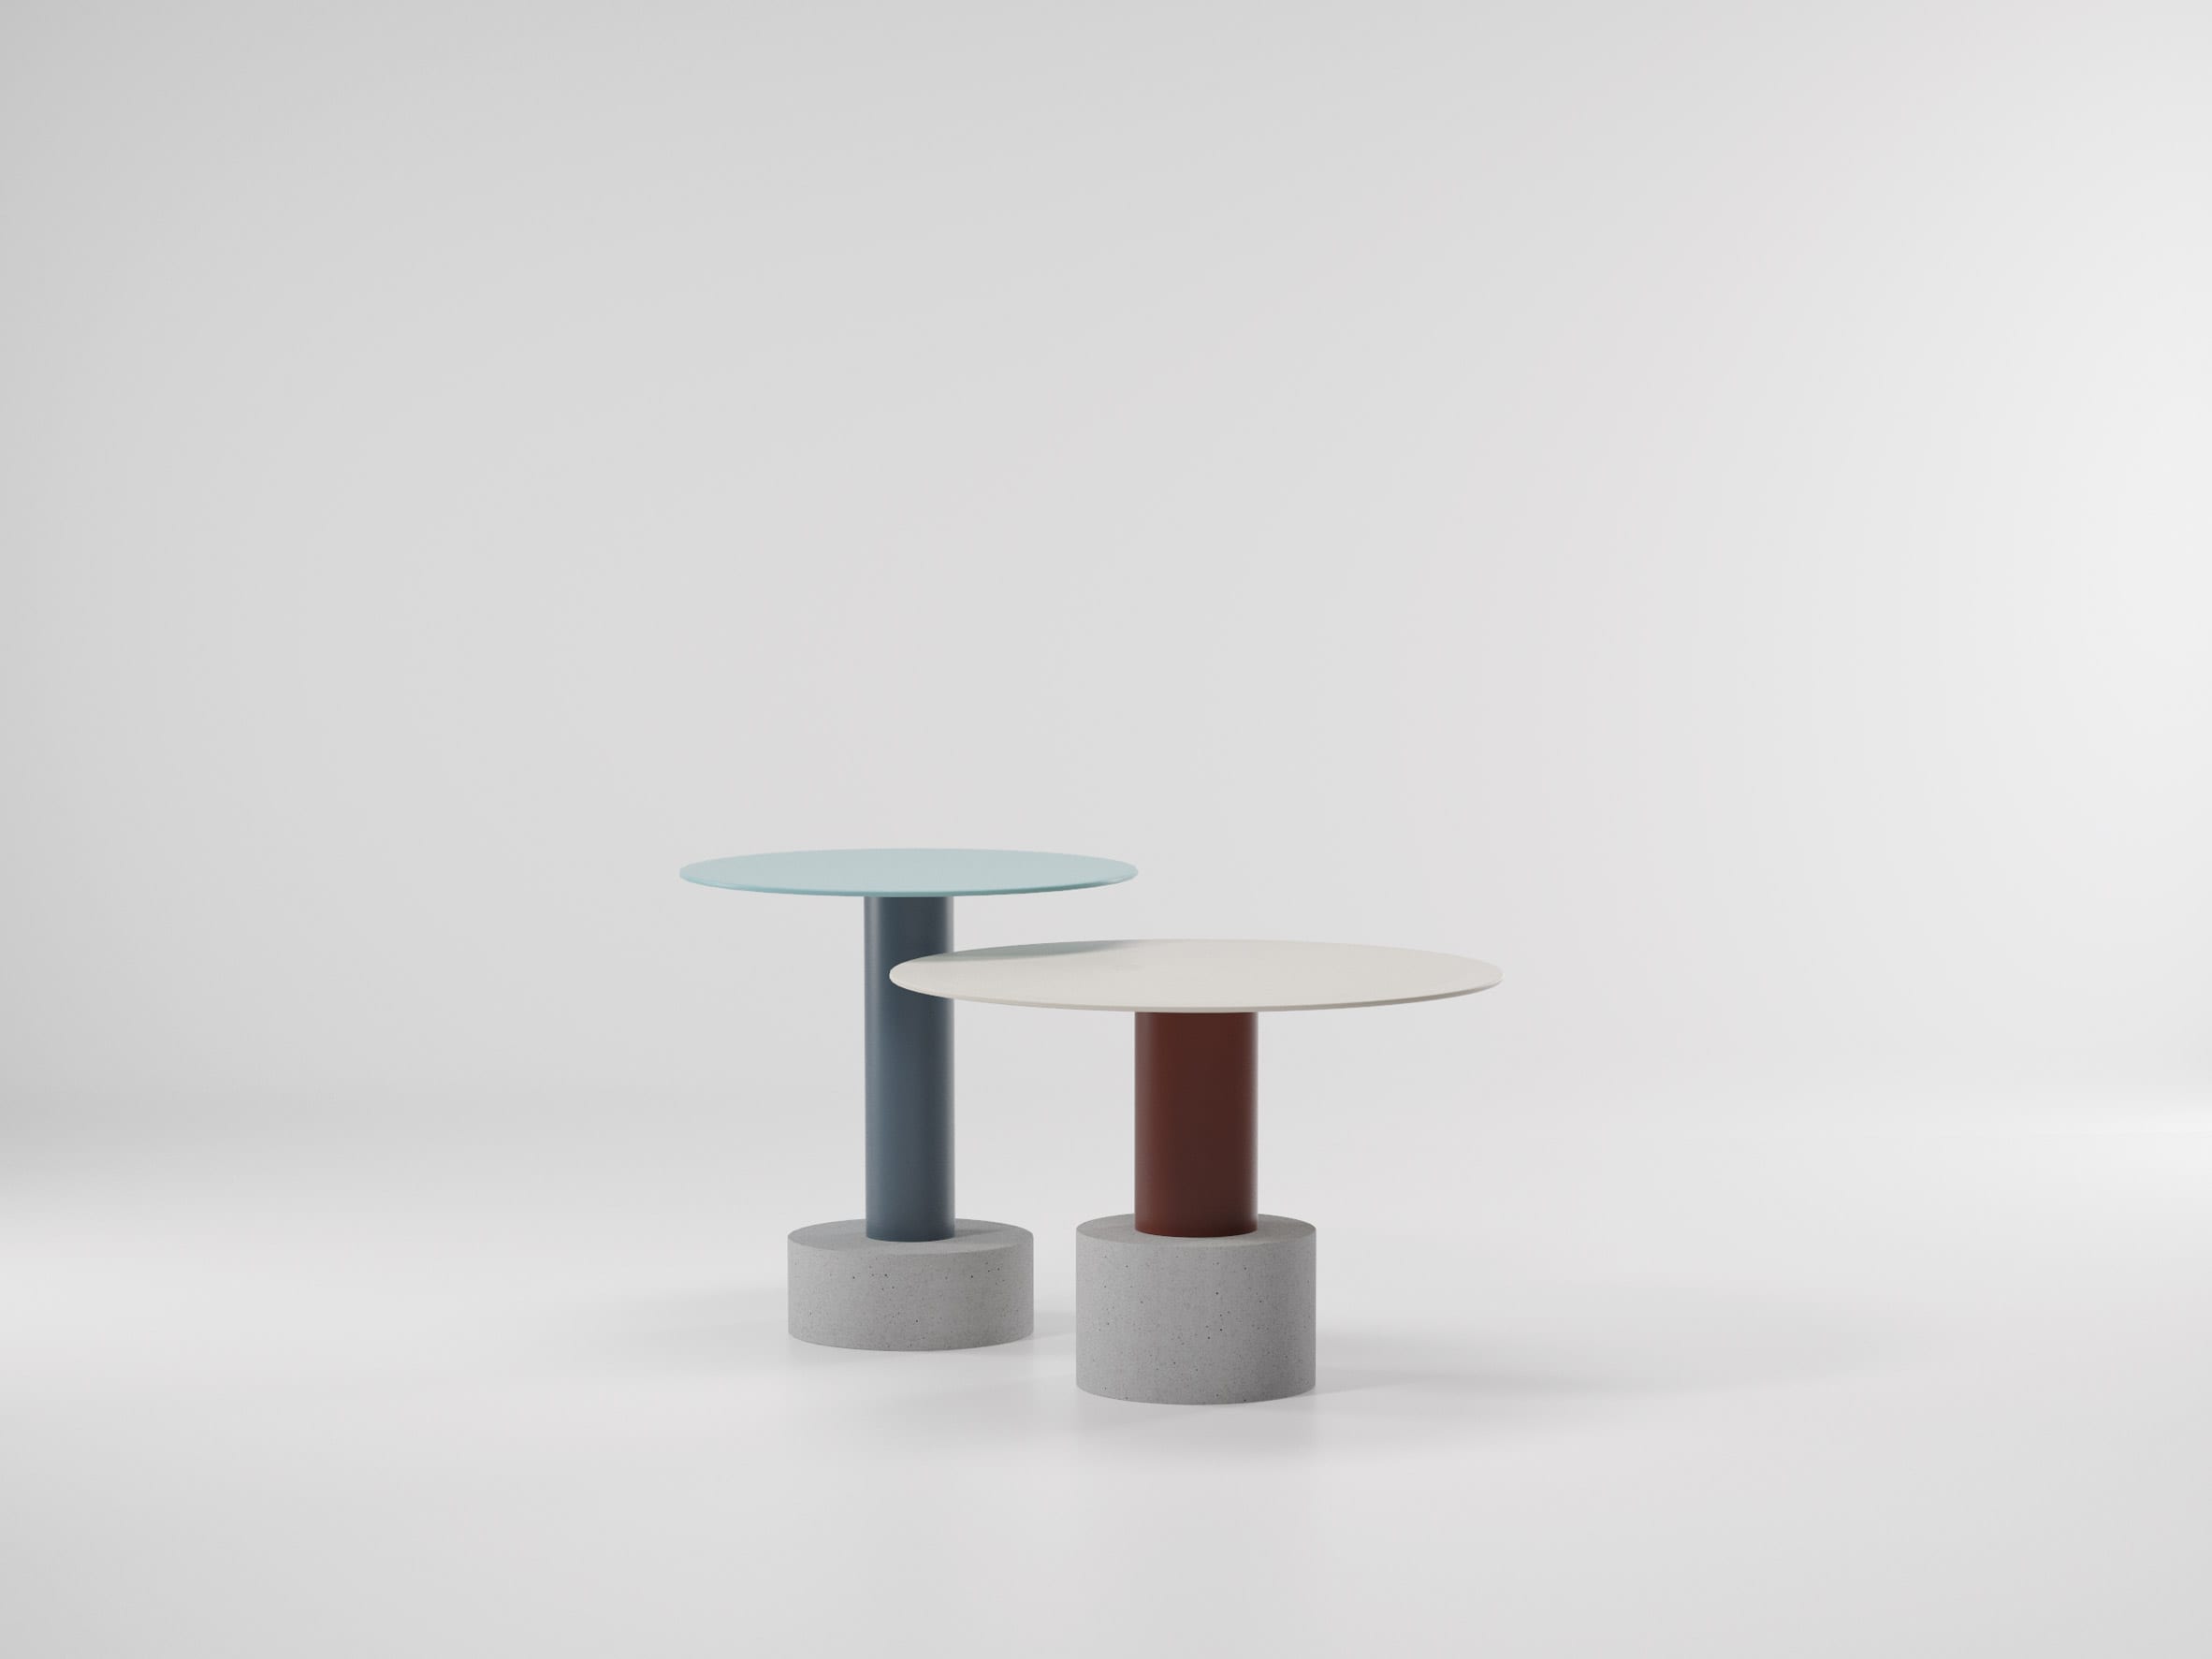 Postmodern tables by patricia urquiola for kettal